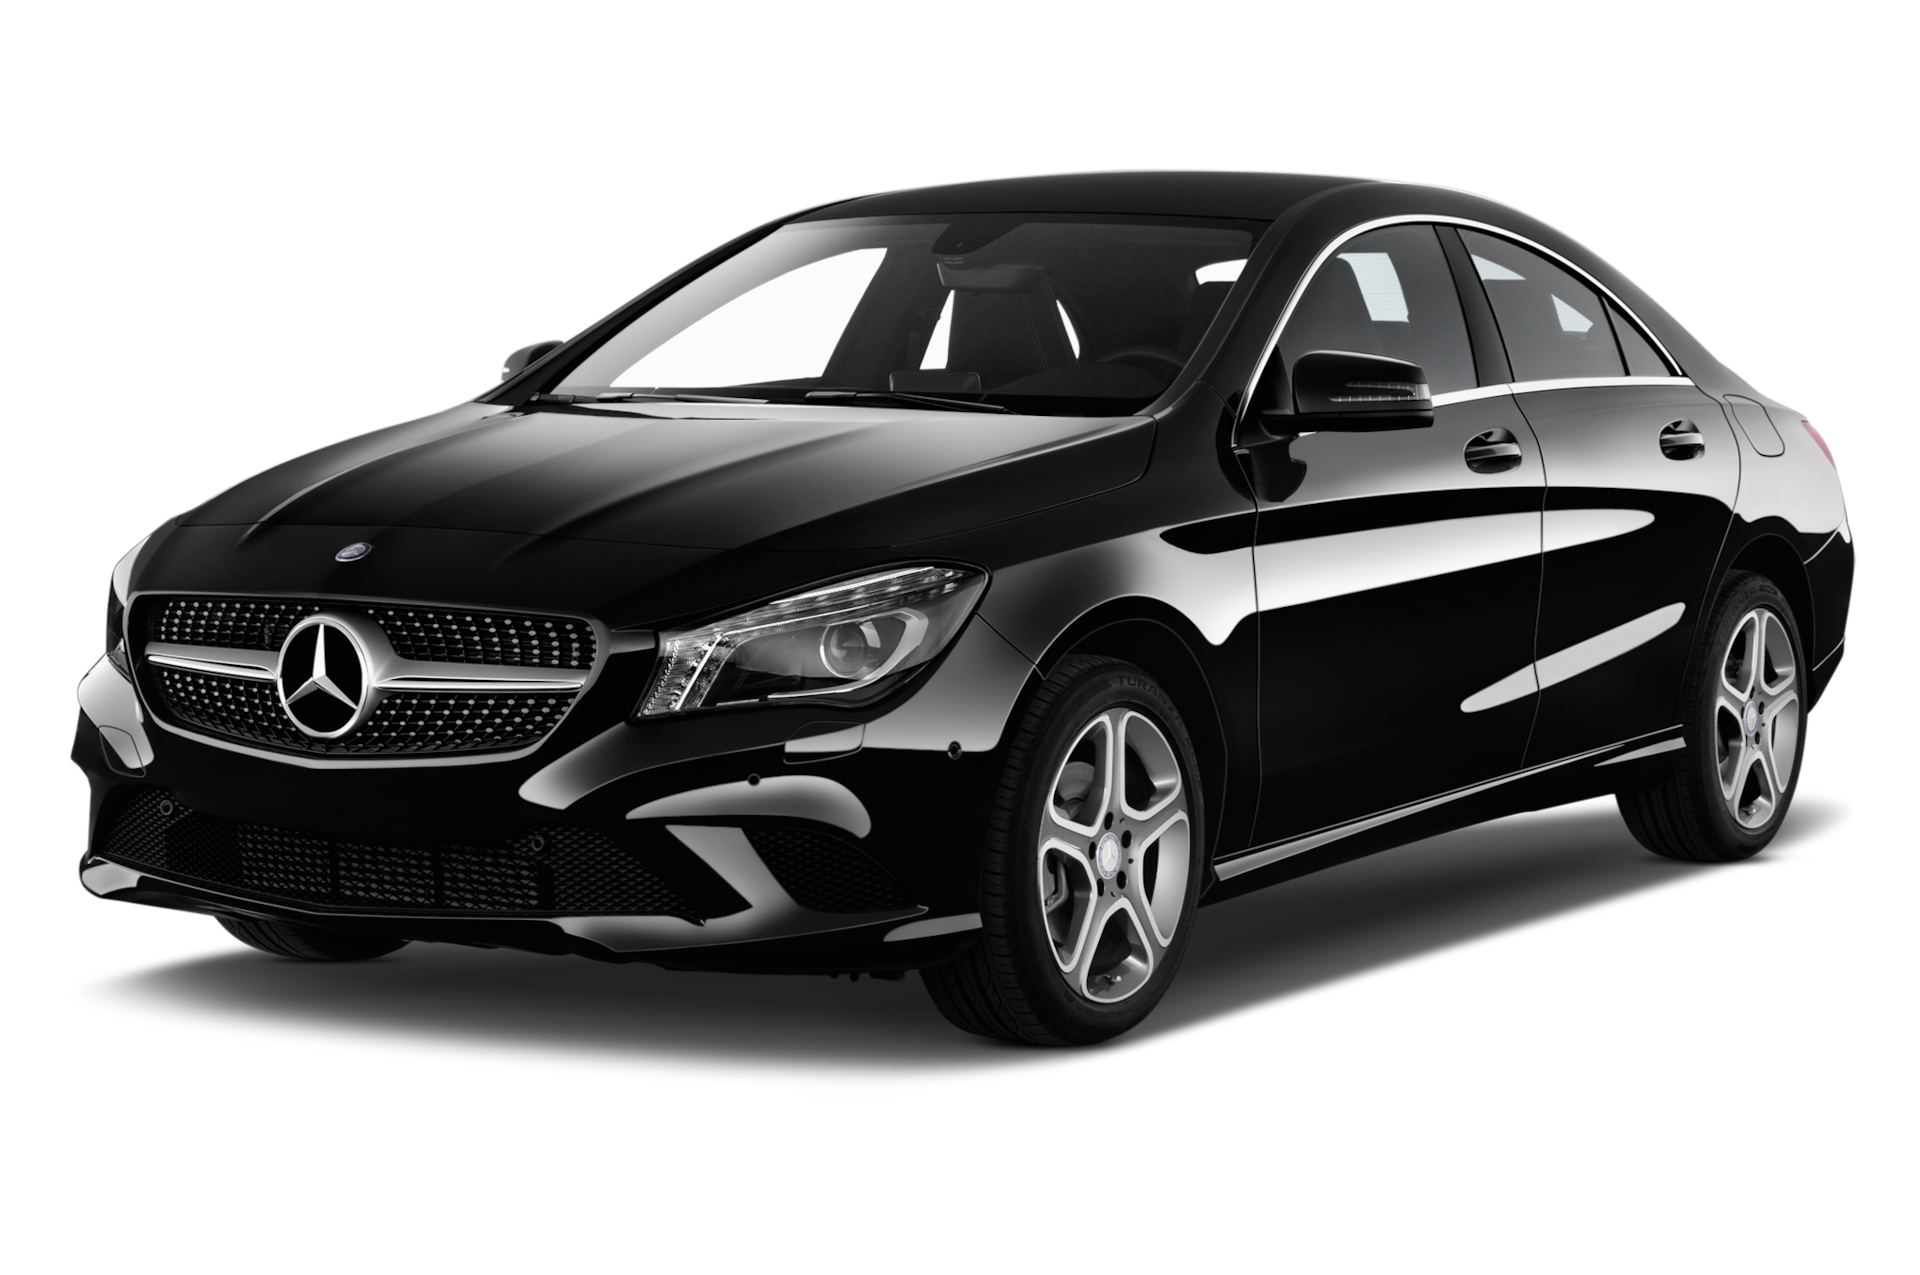 2014 Mercedes-Benz CLA-Class Prices, Reviews, and Photos - MotorTrend